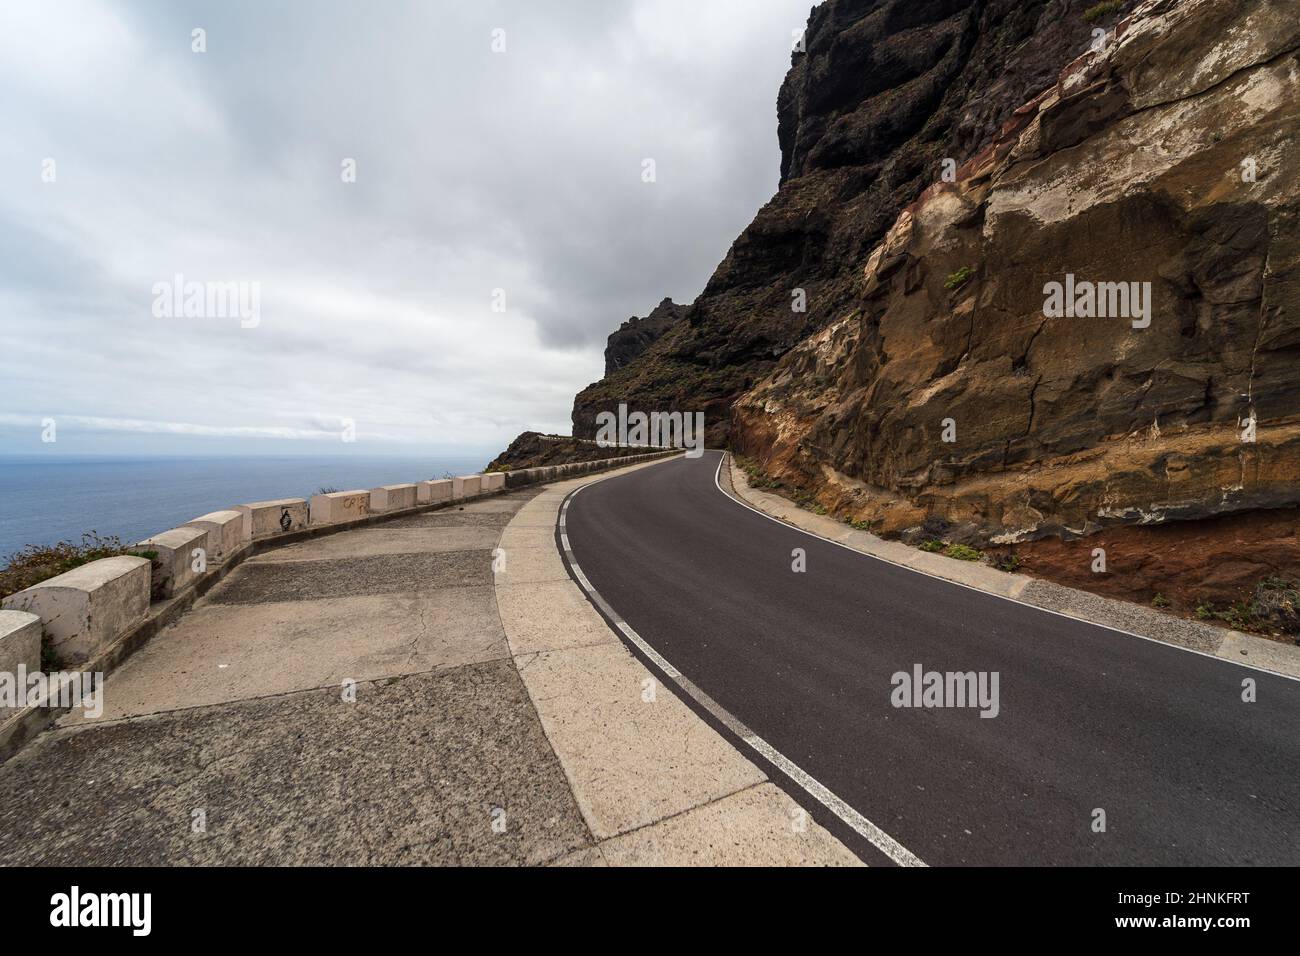 High mountain road at the edge of the ocean. Stock Photo